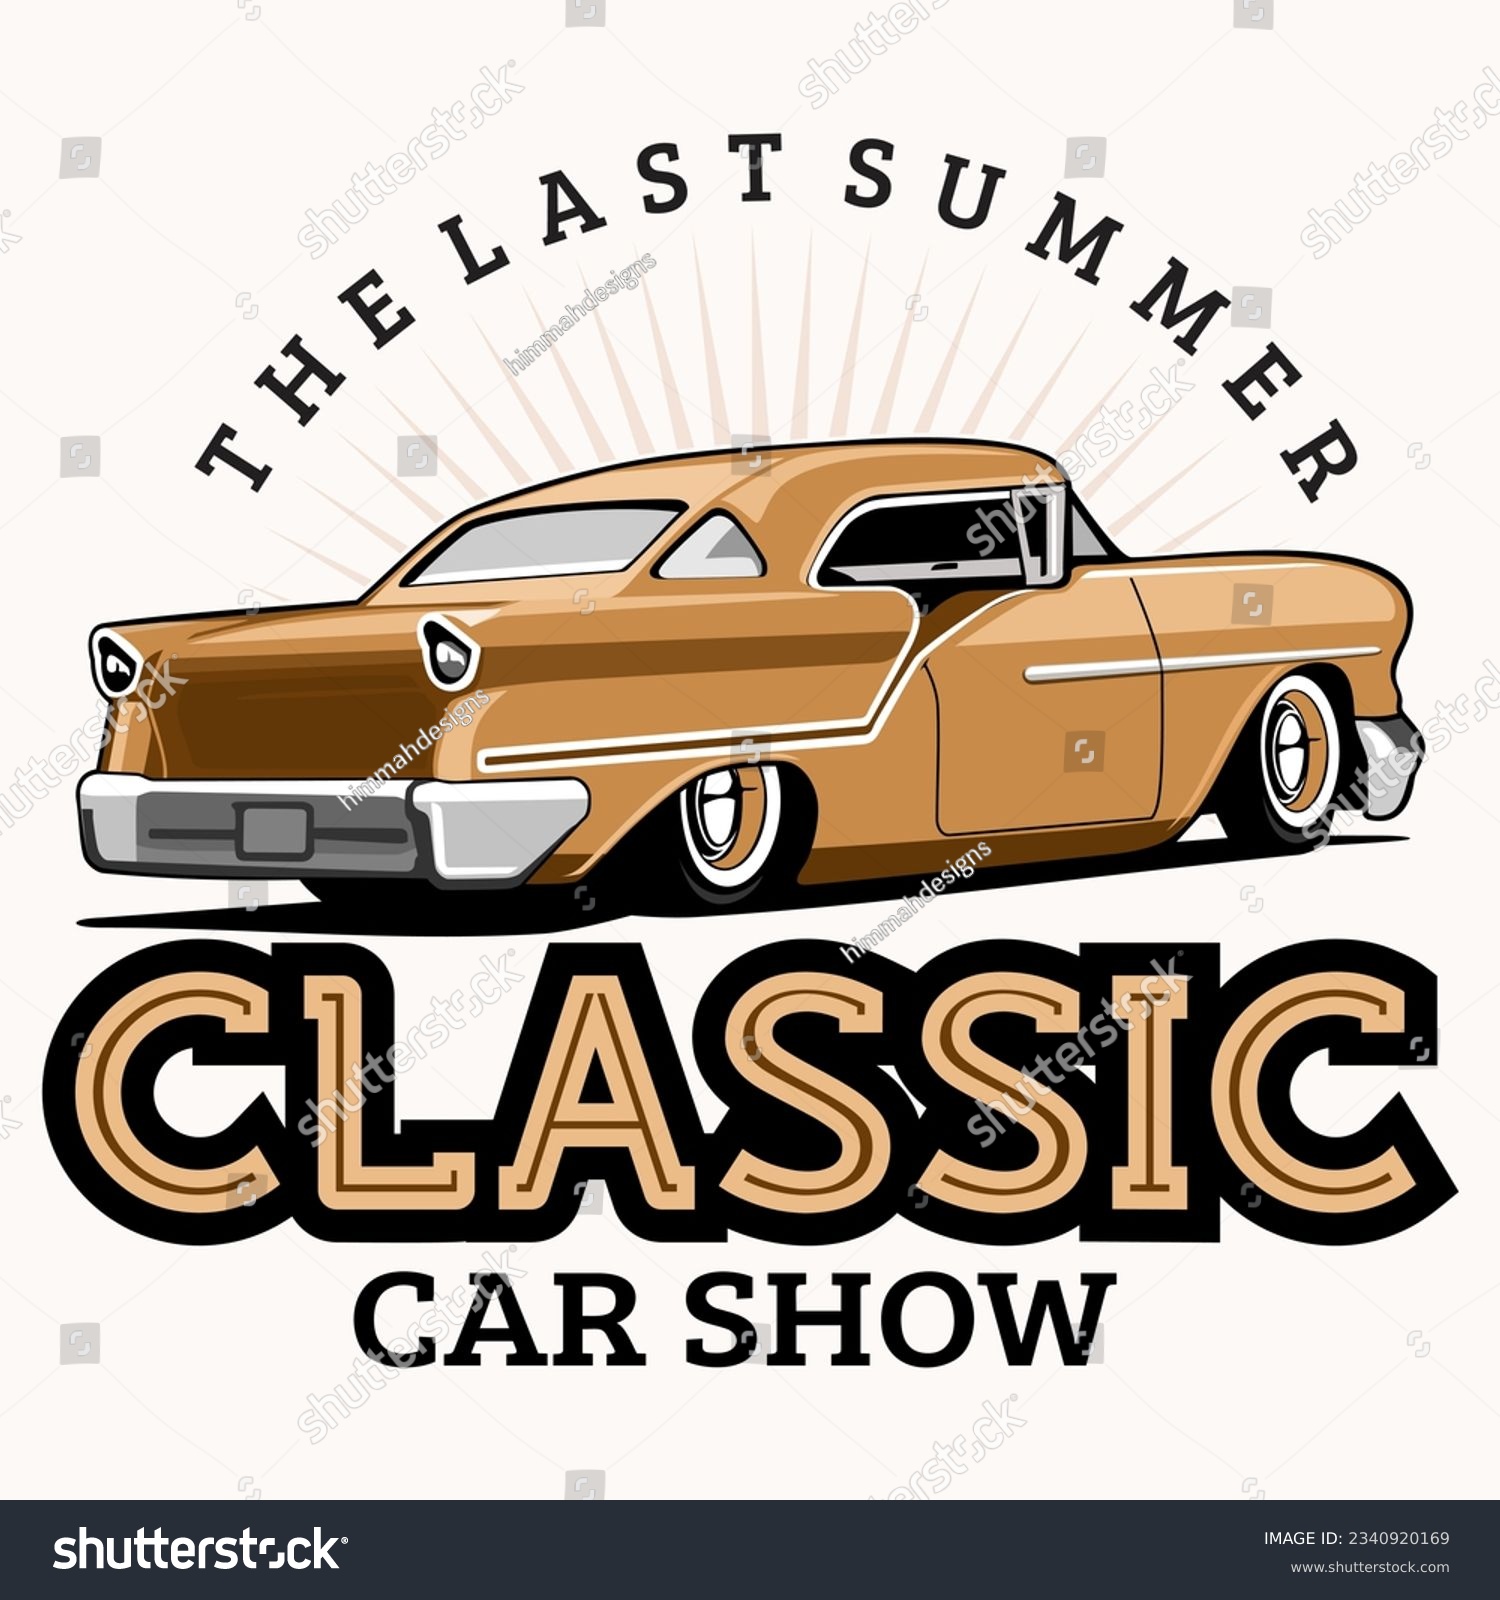 SVG of classic car show party logo design icon vector svg